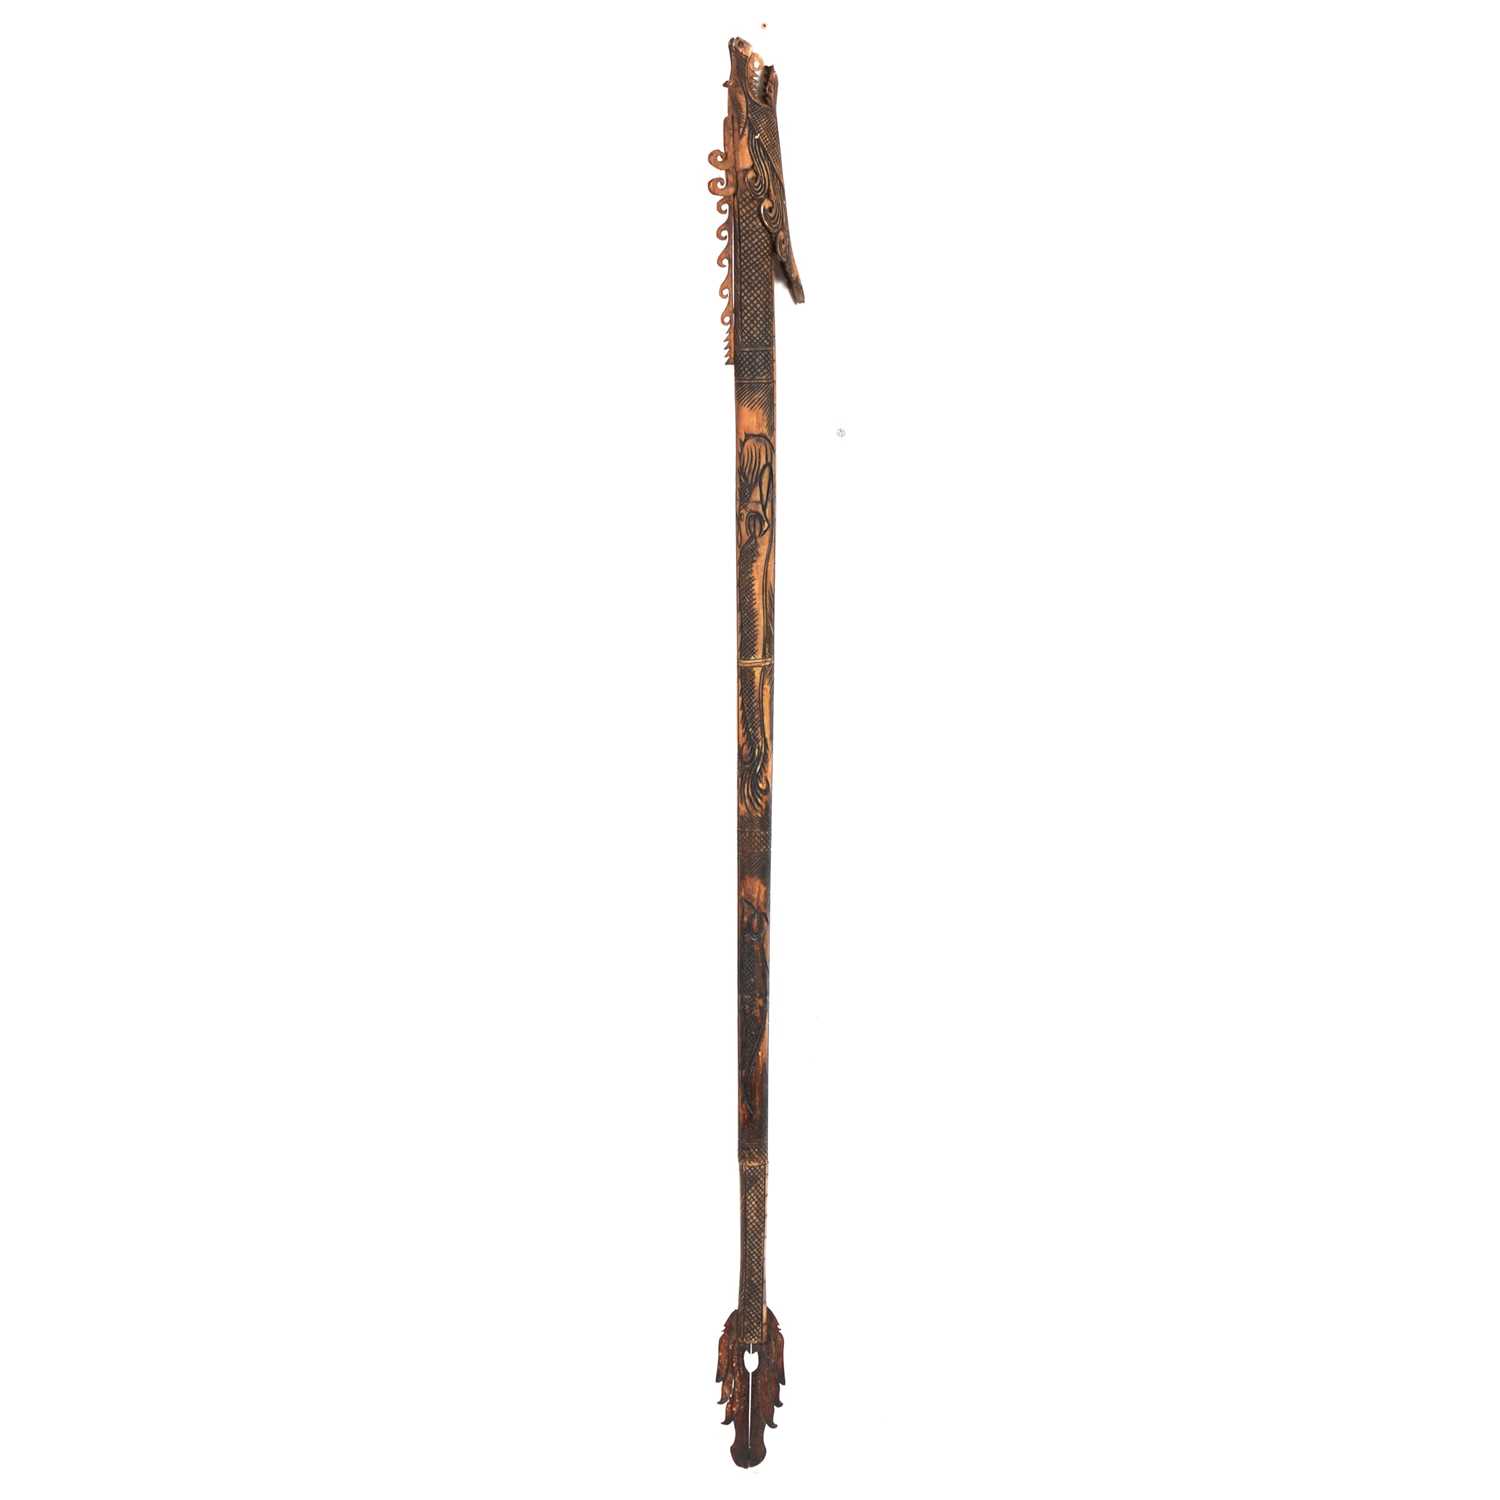 Reproduction ceremonial staff in the form of a sea serpent